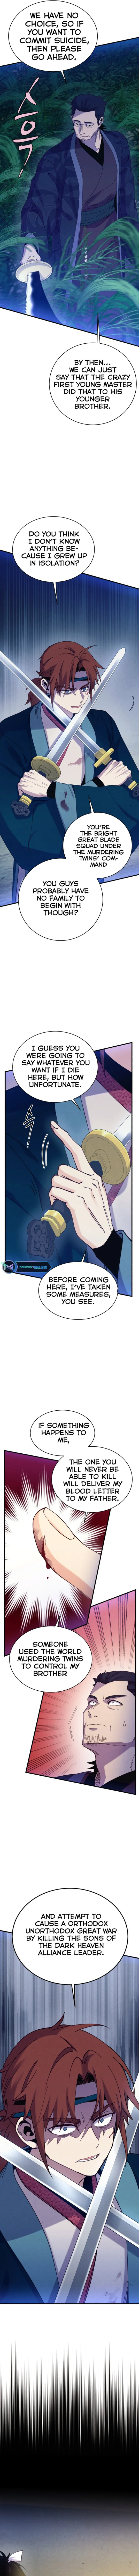 Lightning Degree - Chapter 174 Page 2